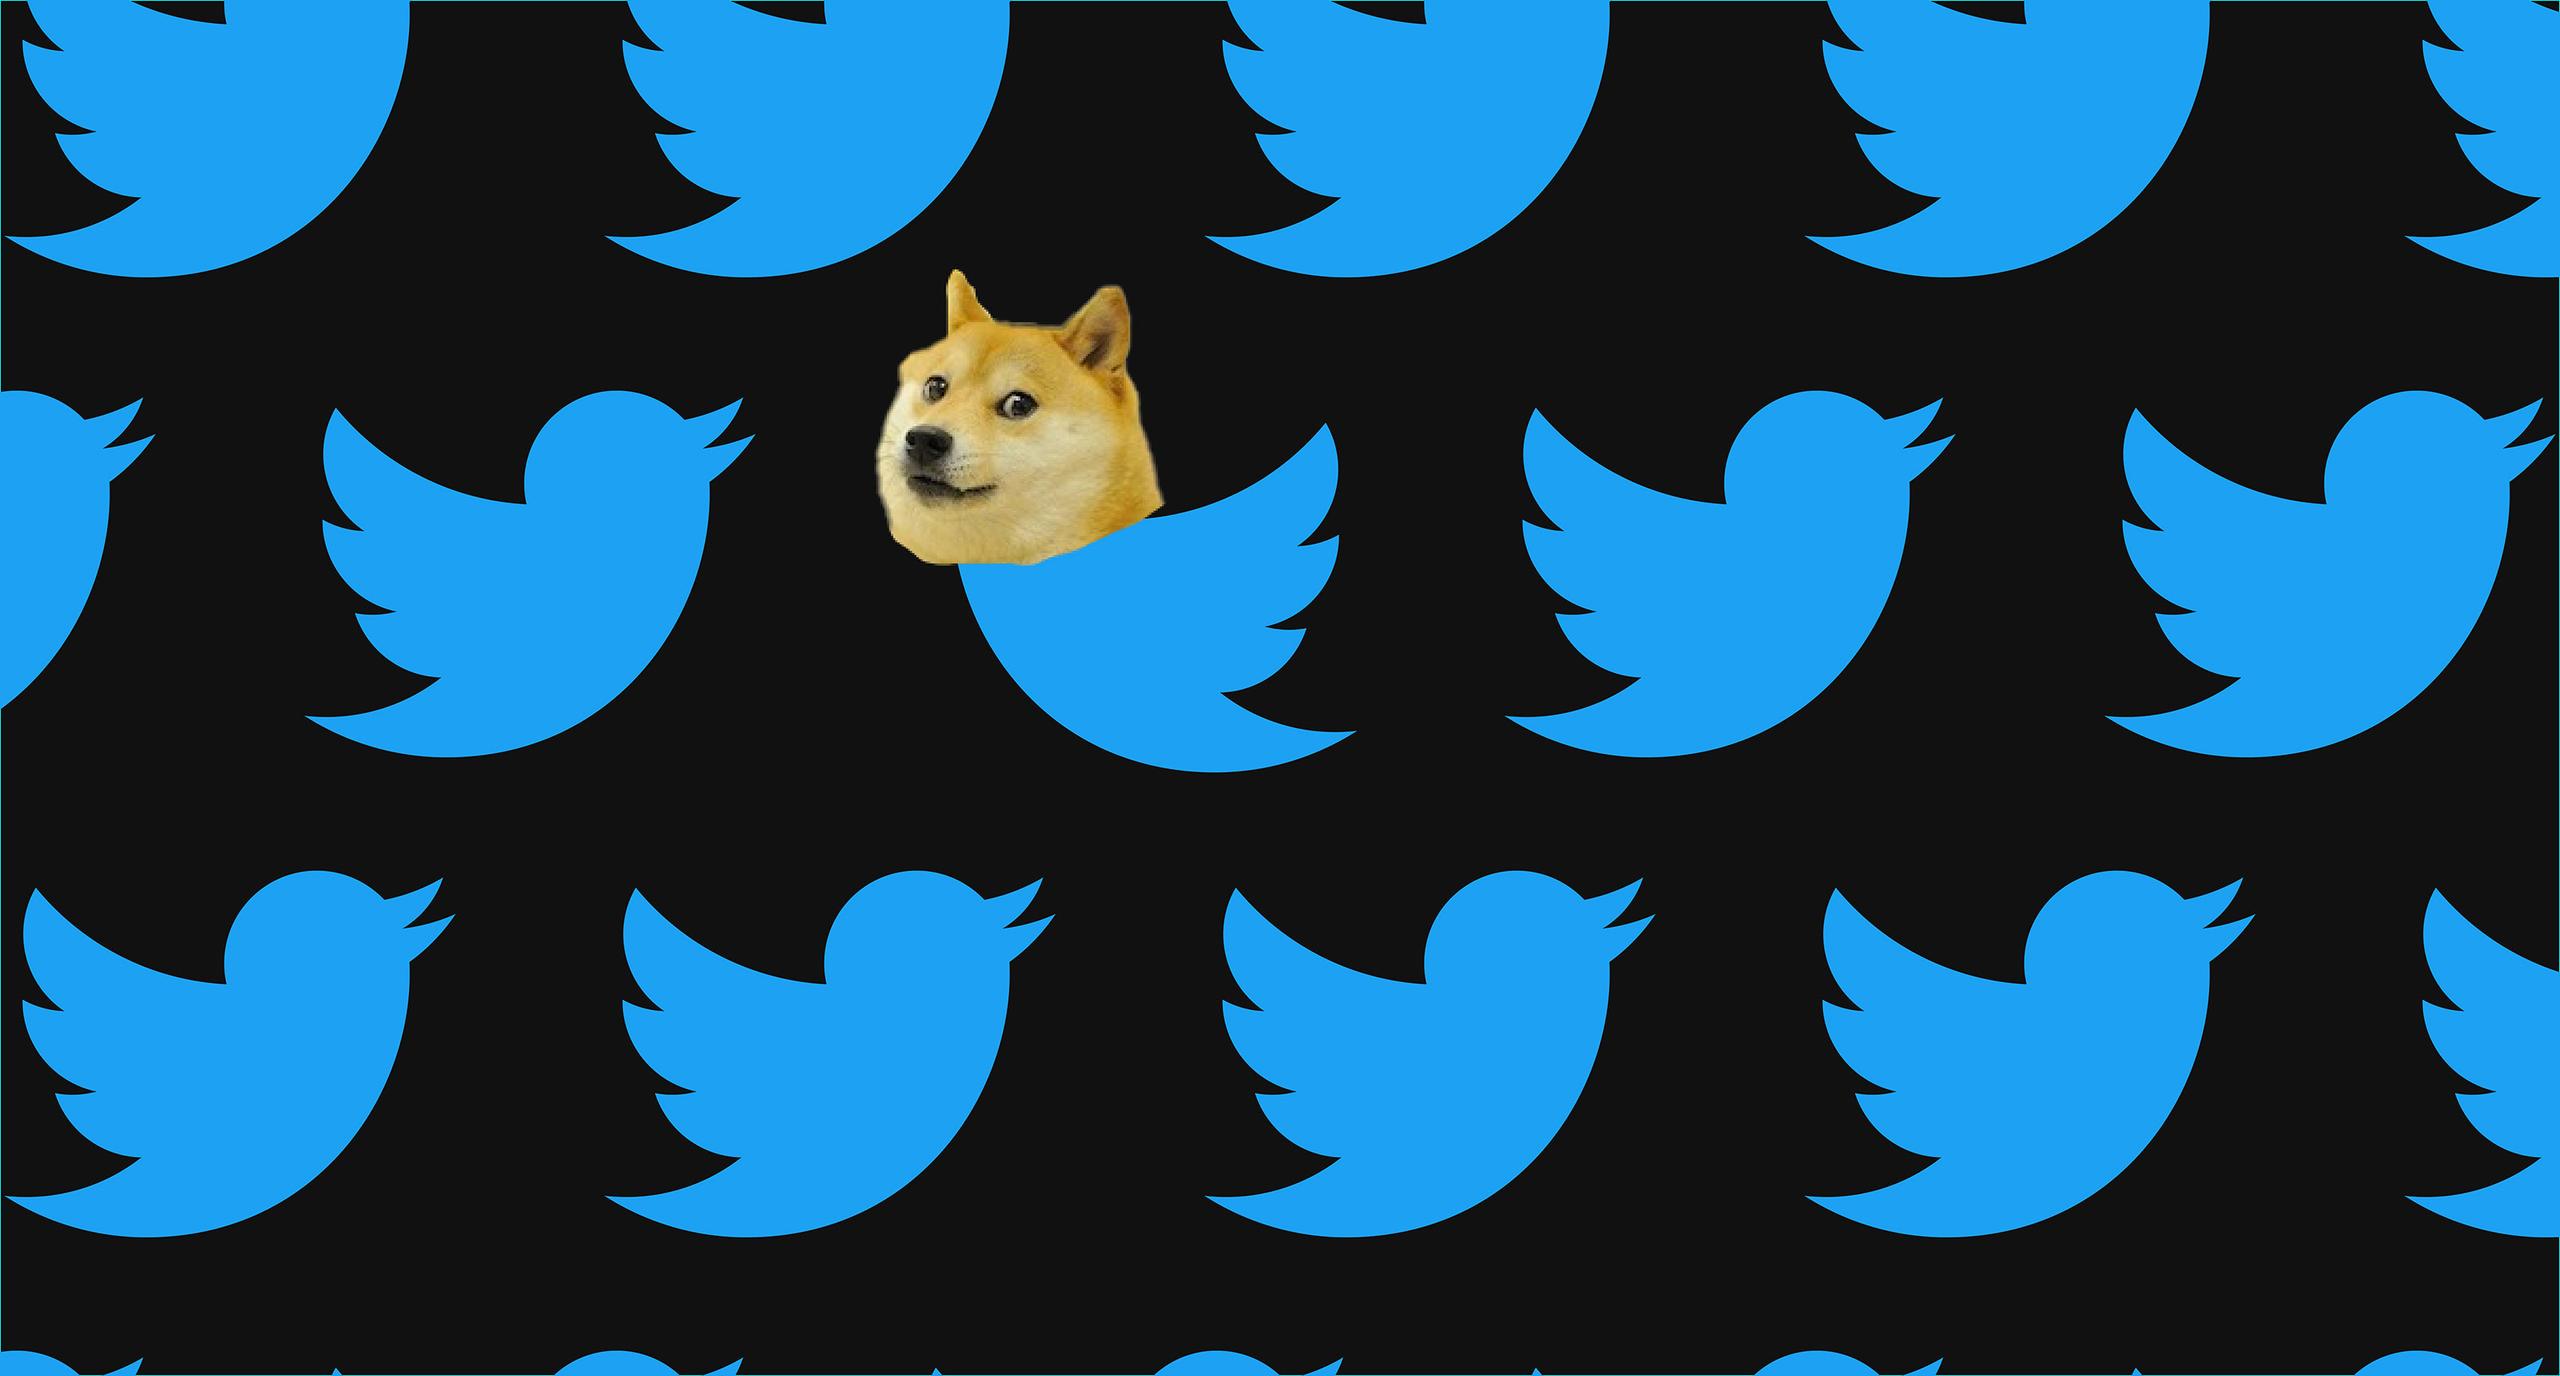 Dogecoin spikes just after Twitter has replaced its logo with an image of Doge